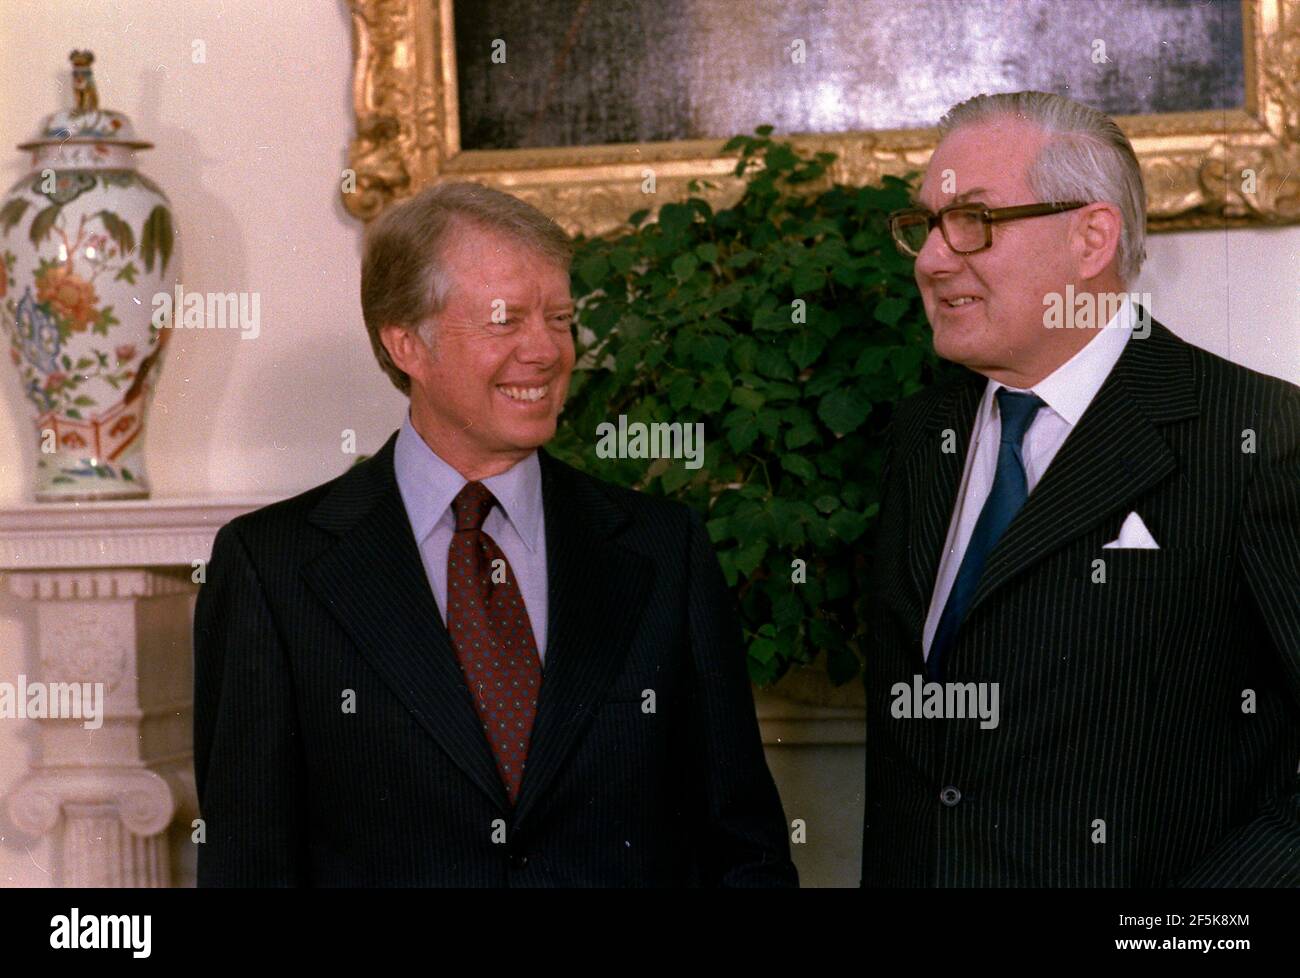 Jimmy Carter and James Callaghan, Prime Minister of Great Britain, March 23, 1978 Stock Photo